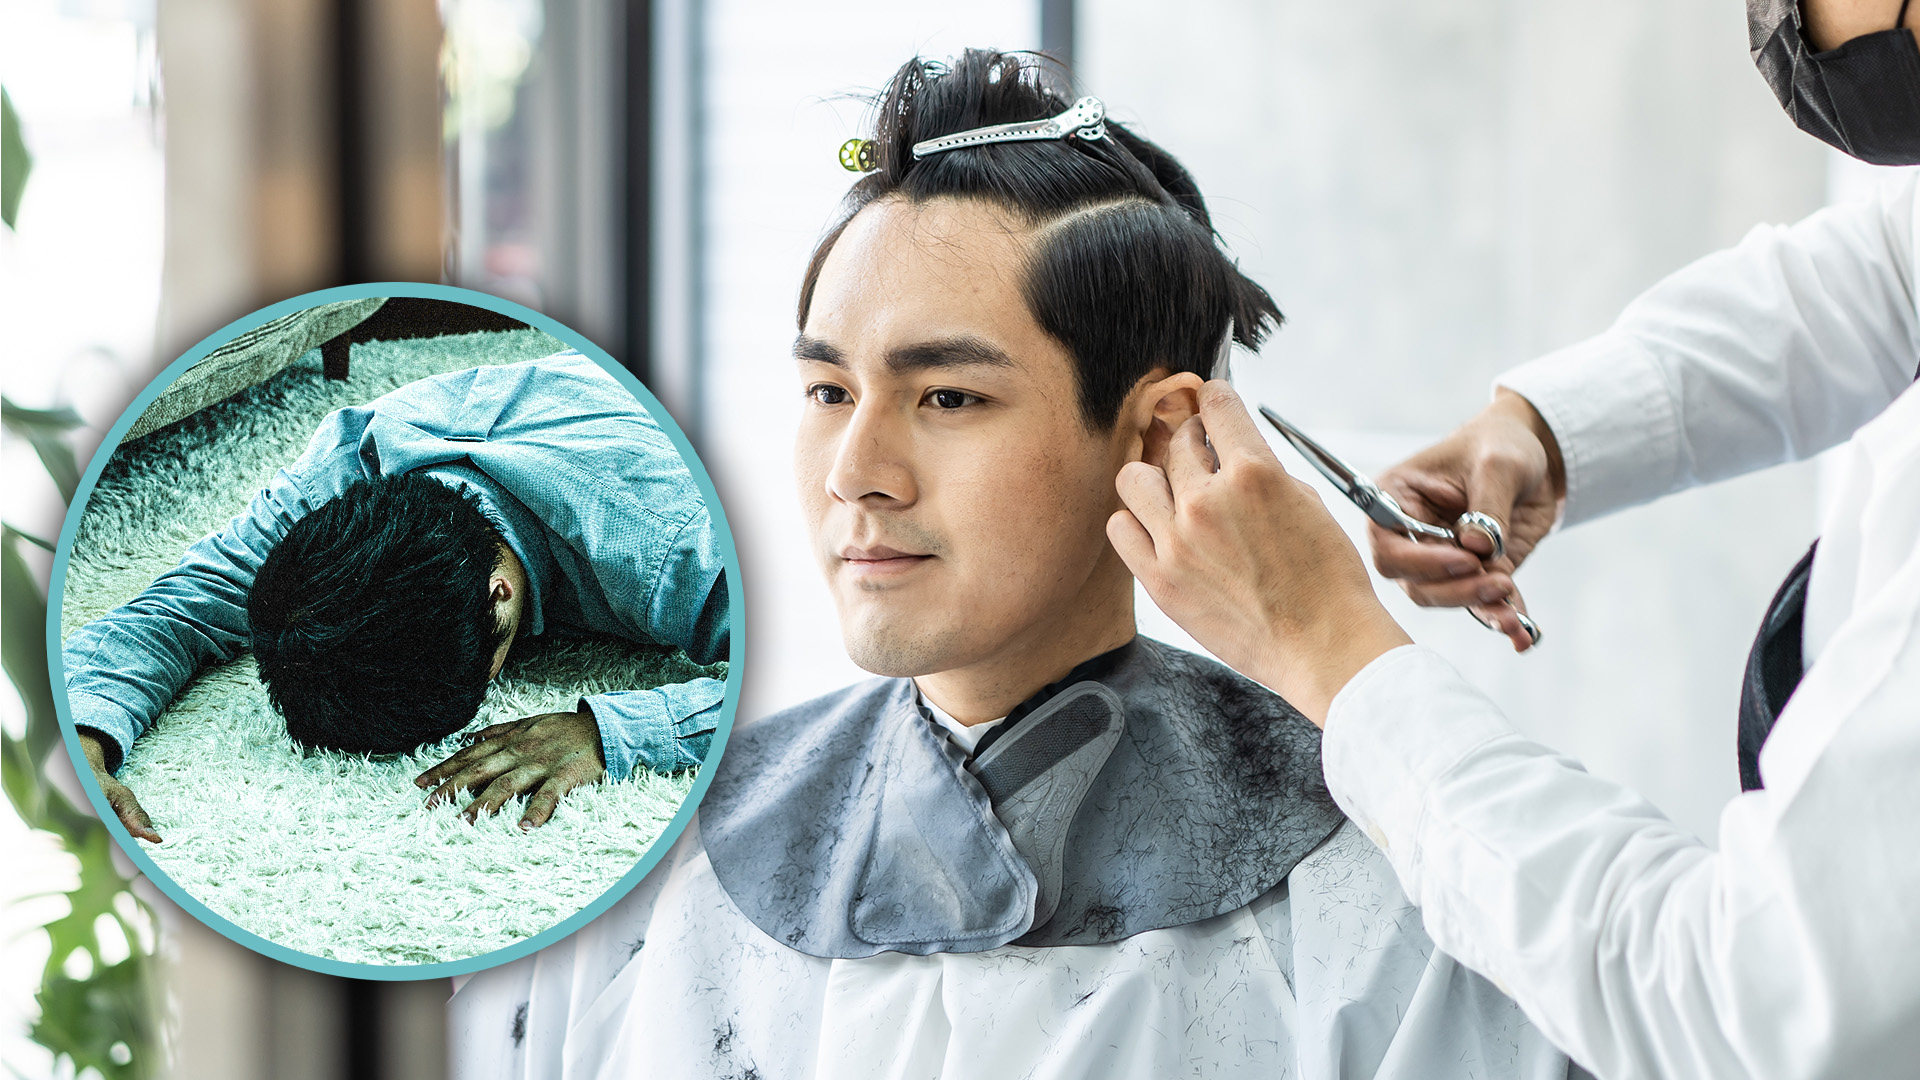 The story of a man in China who was accused of murdering his uncle because the man died in a road accident on the same Lunar New Year day that the nephew had a haircut, has sparked an online discussion about superstition on the mainland. Photo: SCMP composite/Shutterstock